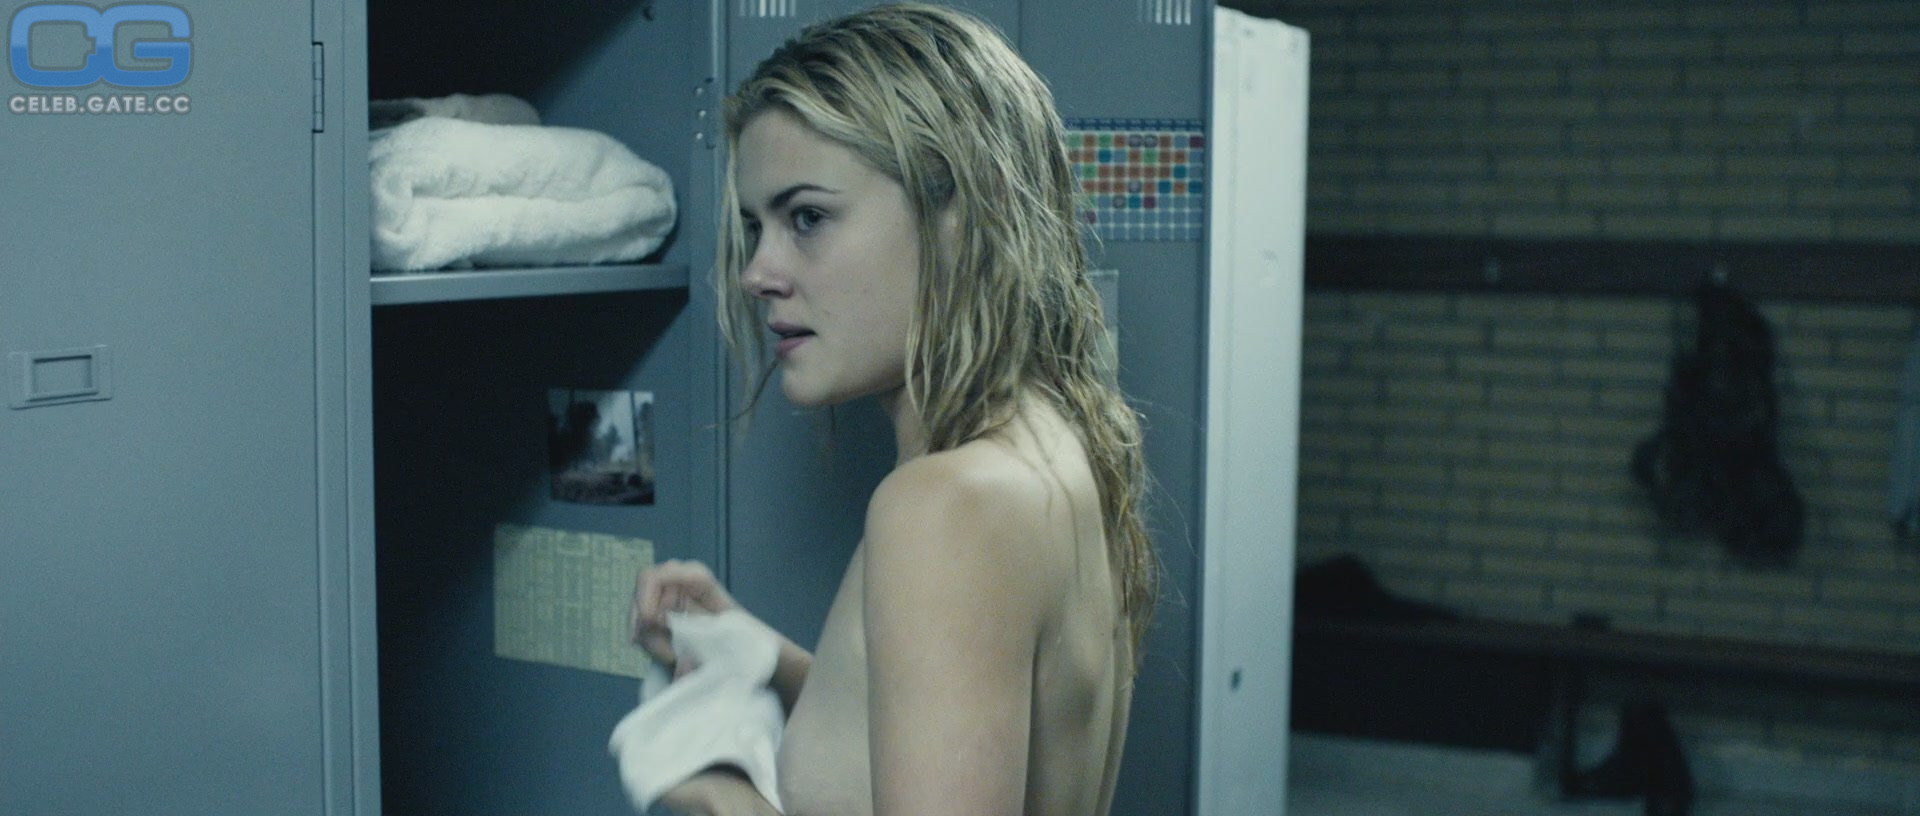 Rachael taylor fappening